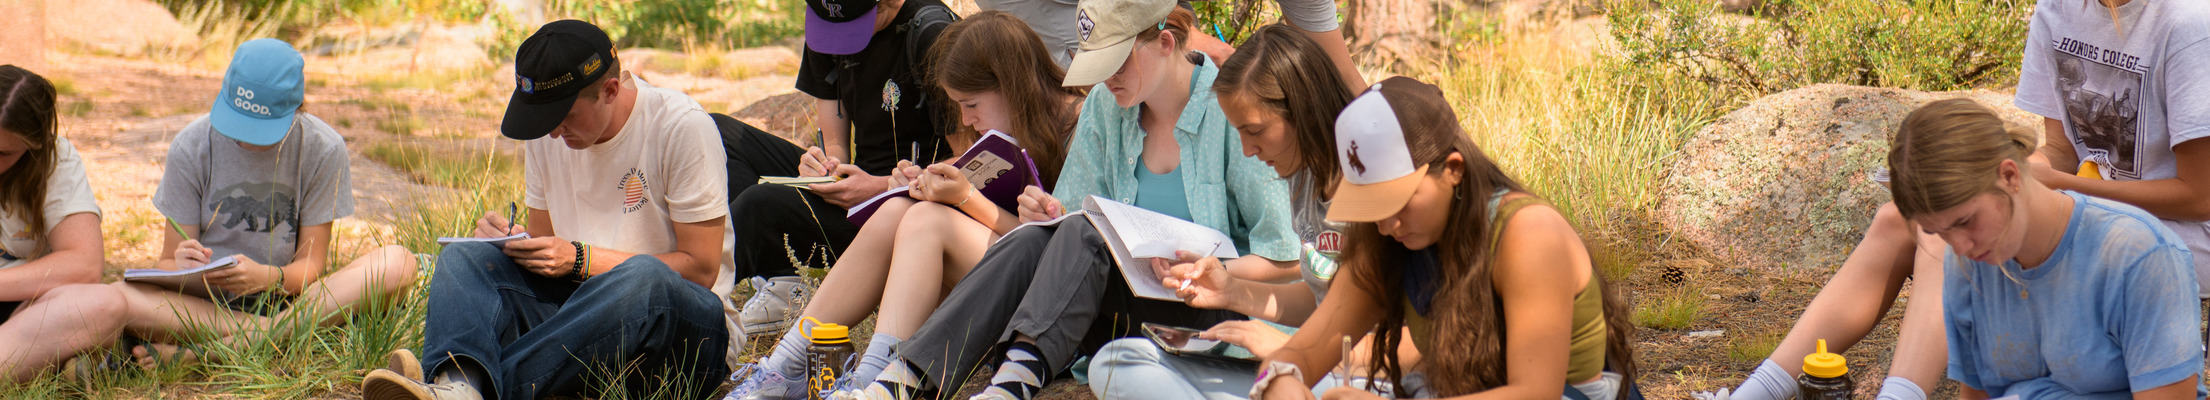 A group of students sit together reading outside near some large boulders.